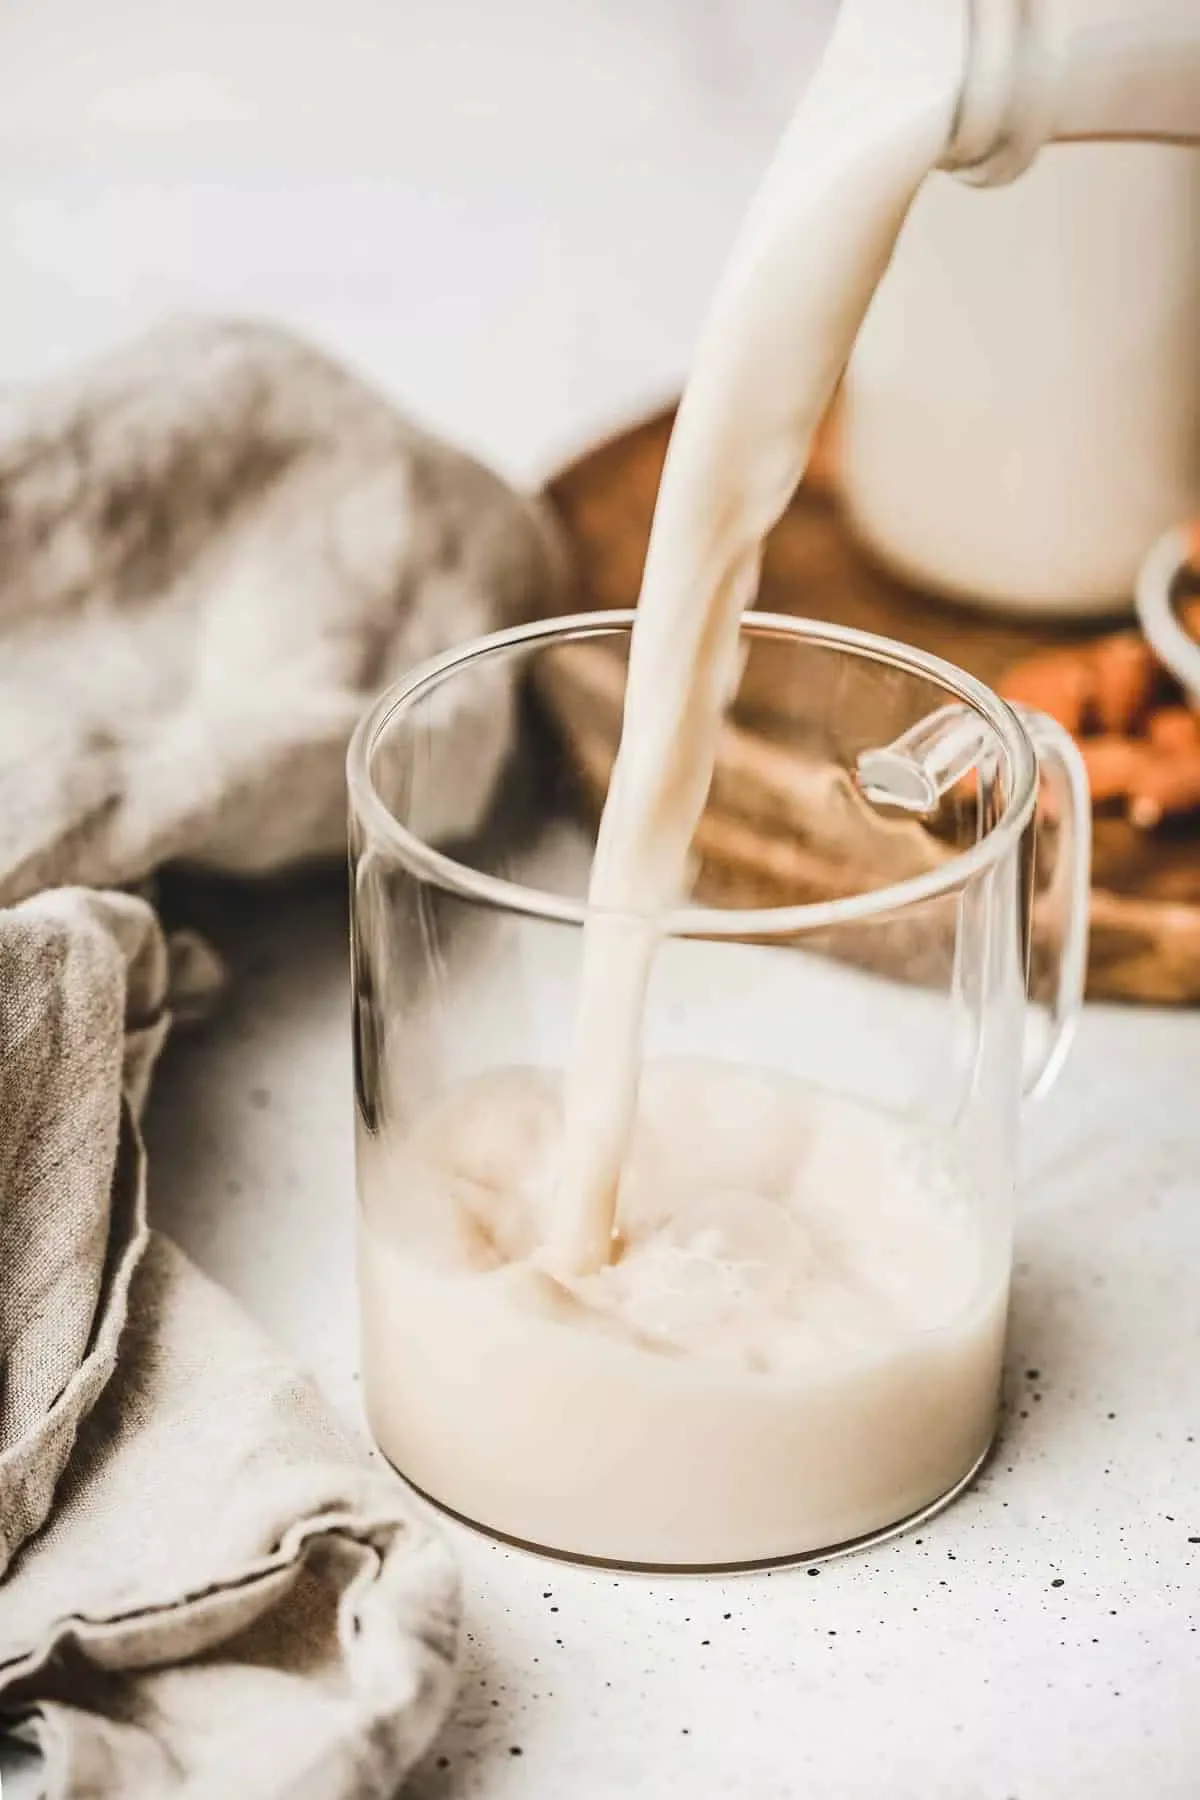 How to make almond milk at home